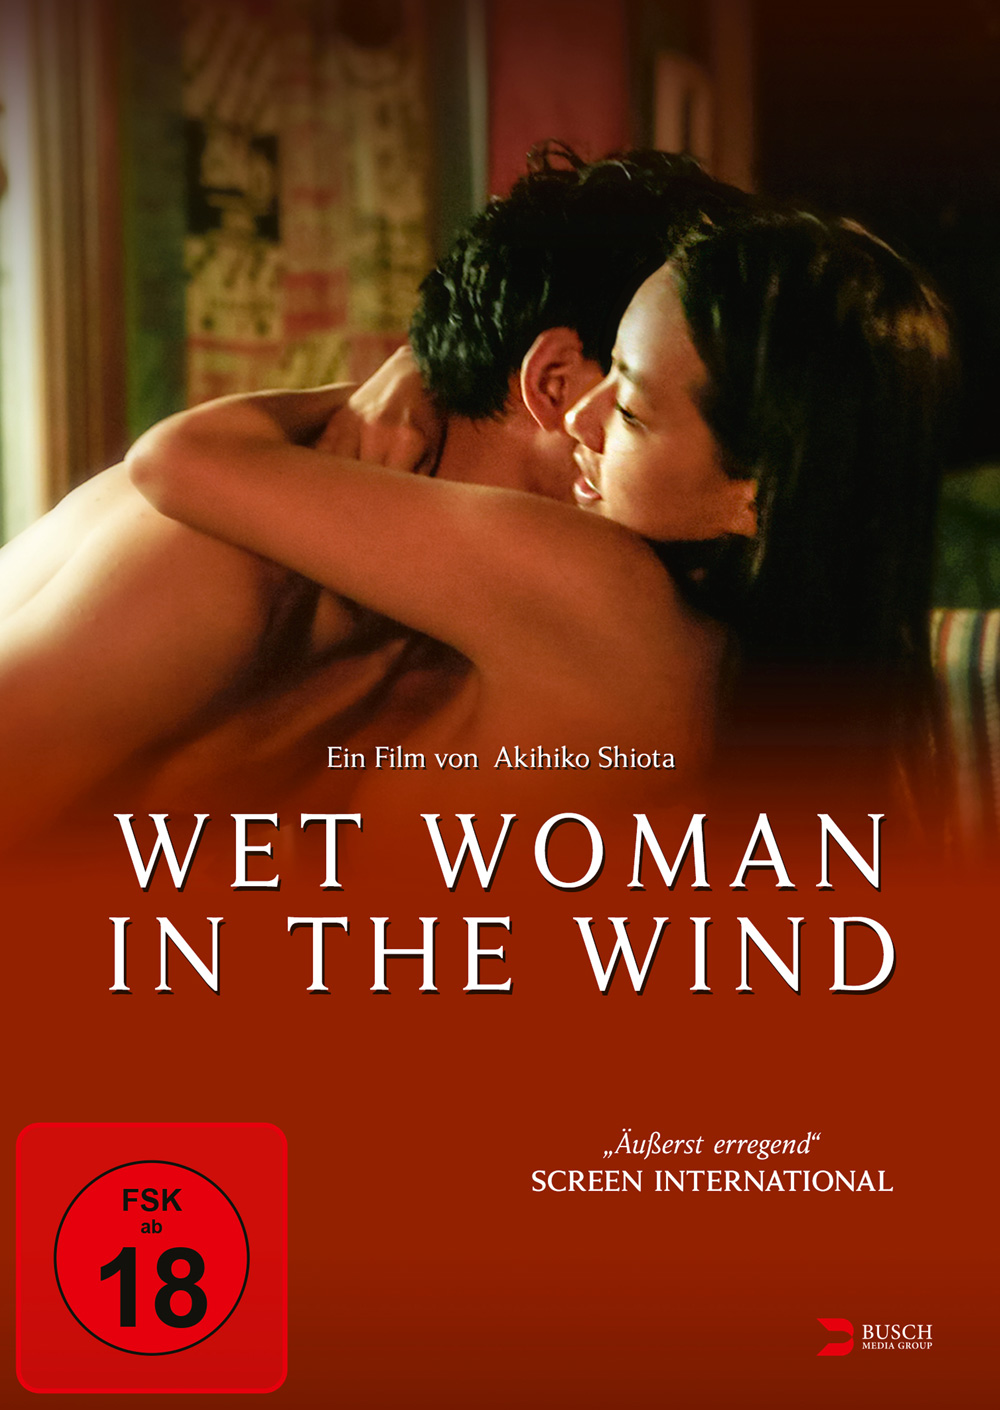 WET WOMAN IN THE WIND - Busch Media Group